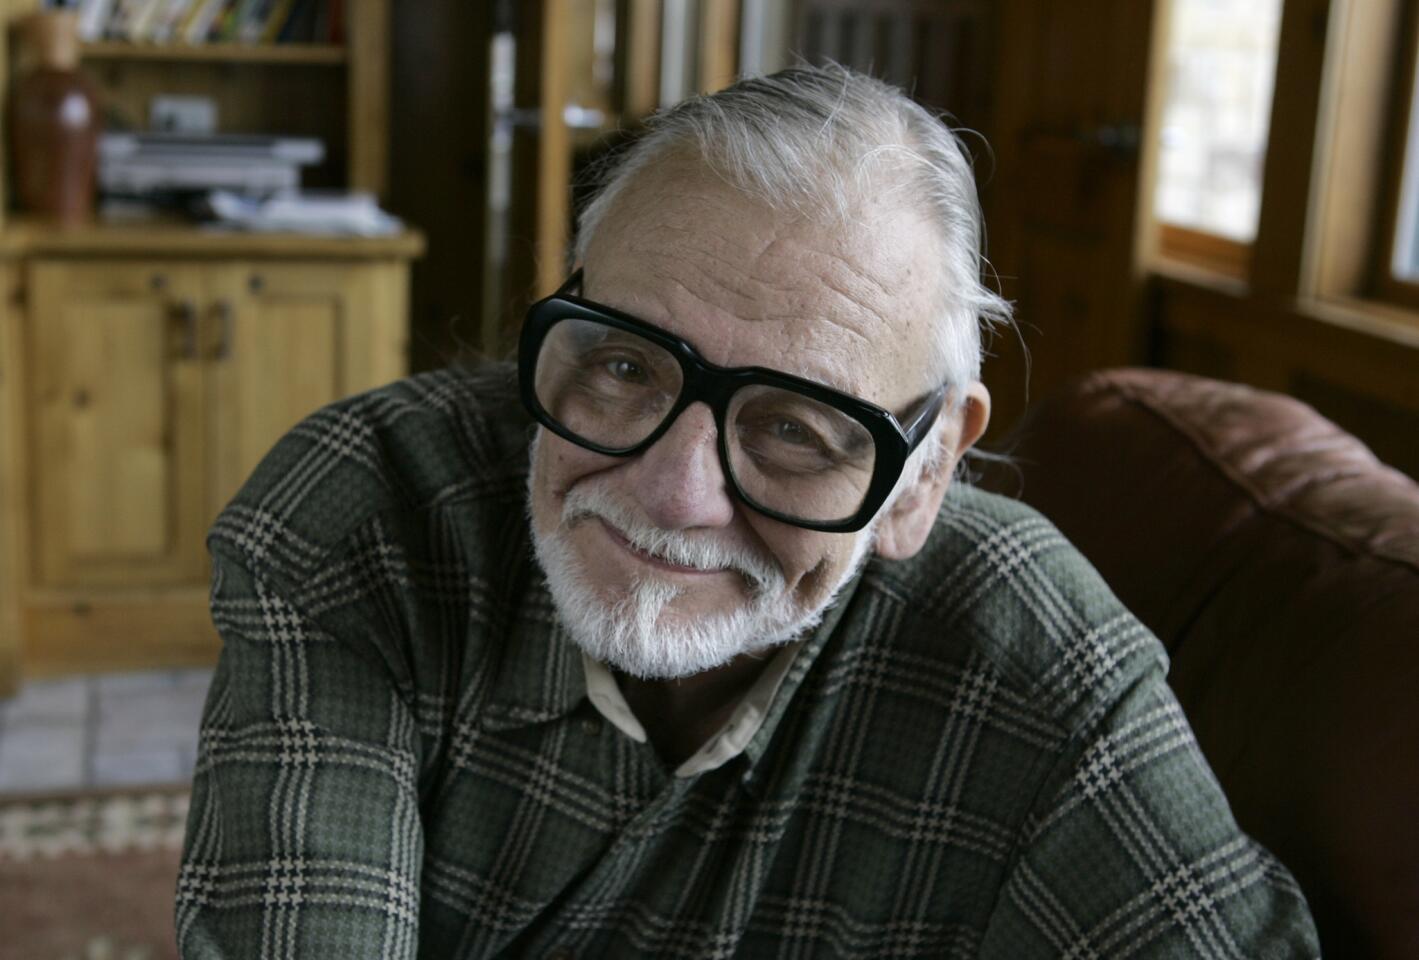 George Romero, whose classic "Night of the Living Dead" and other horror films turned zombie movies into social commentaries and who saw his flesh-devouring undead spawn countless imitators, remakes and homages, died at age 77. Romero died July 16, 2017 following a battle with lung cancer. Read more.